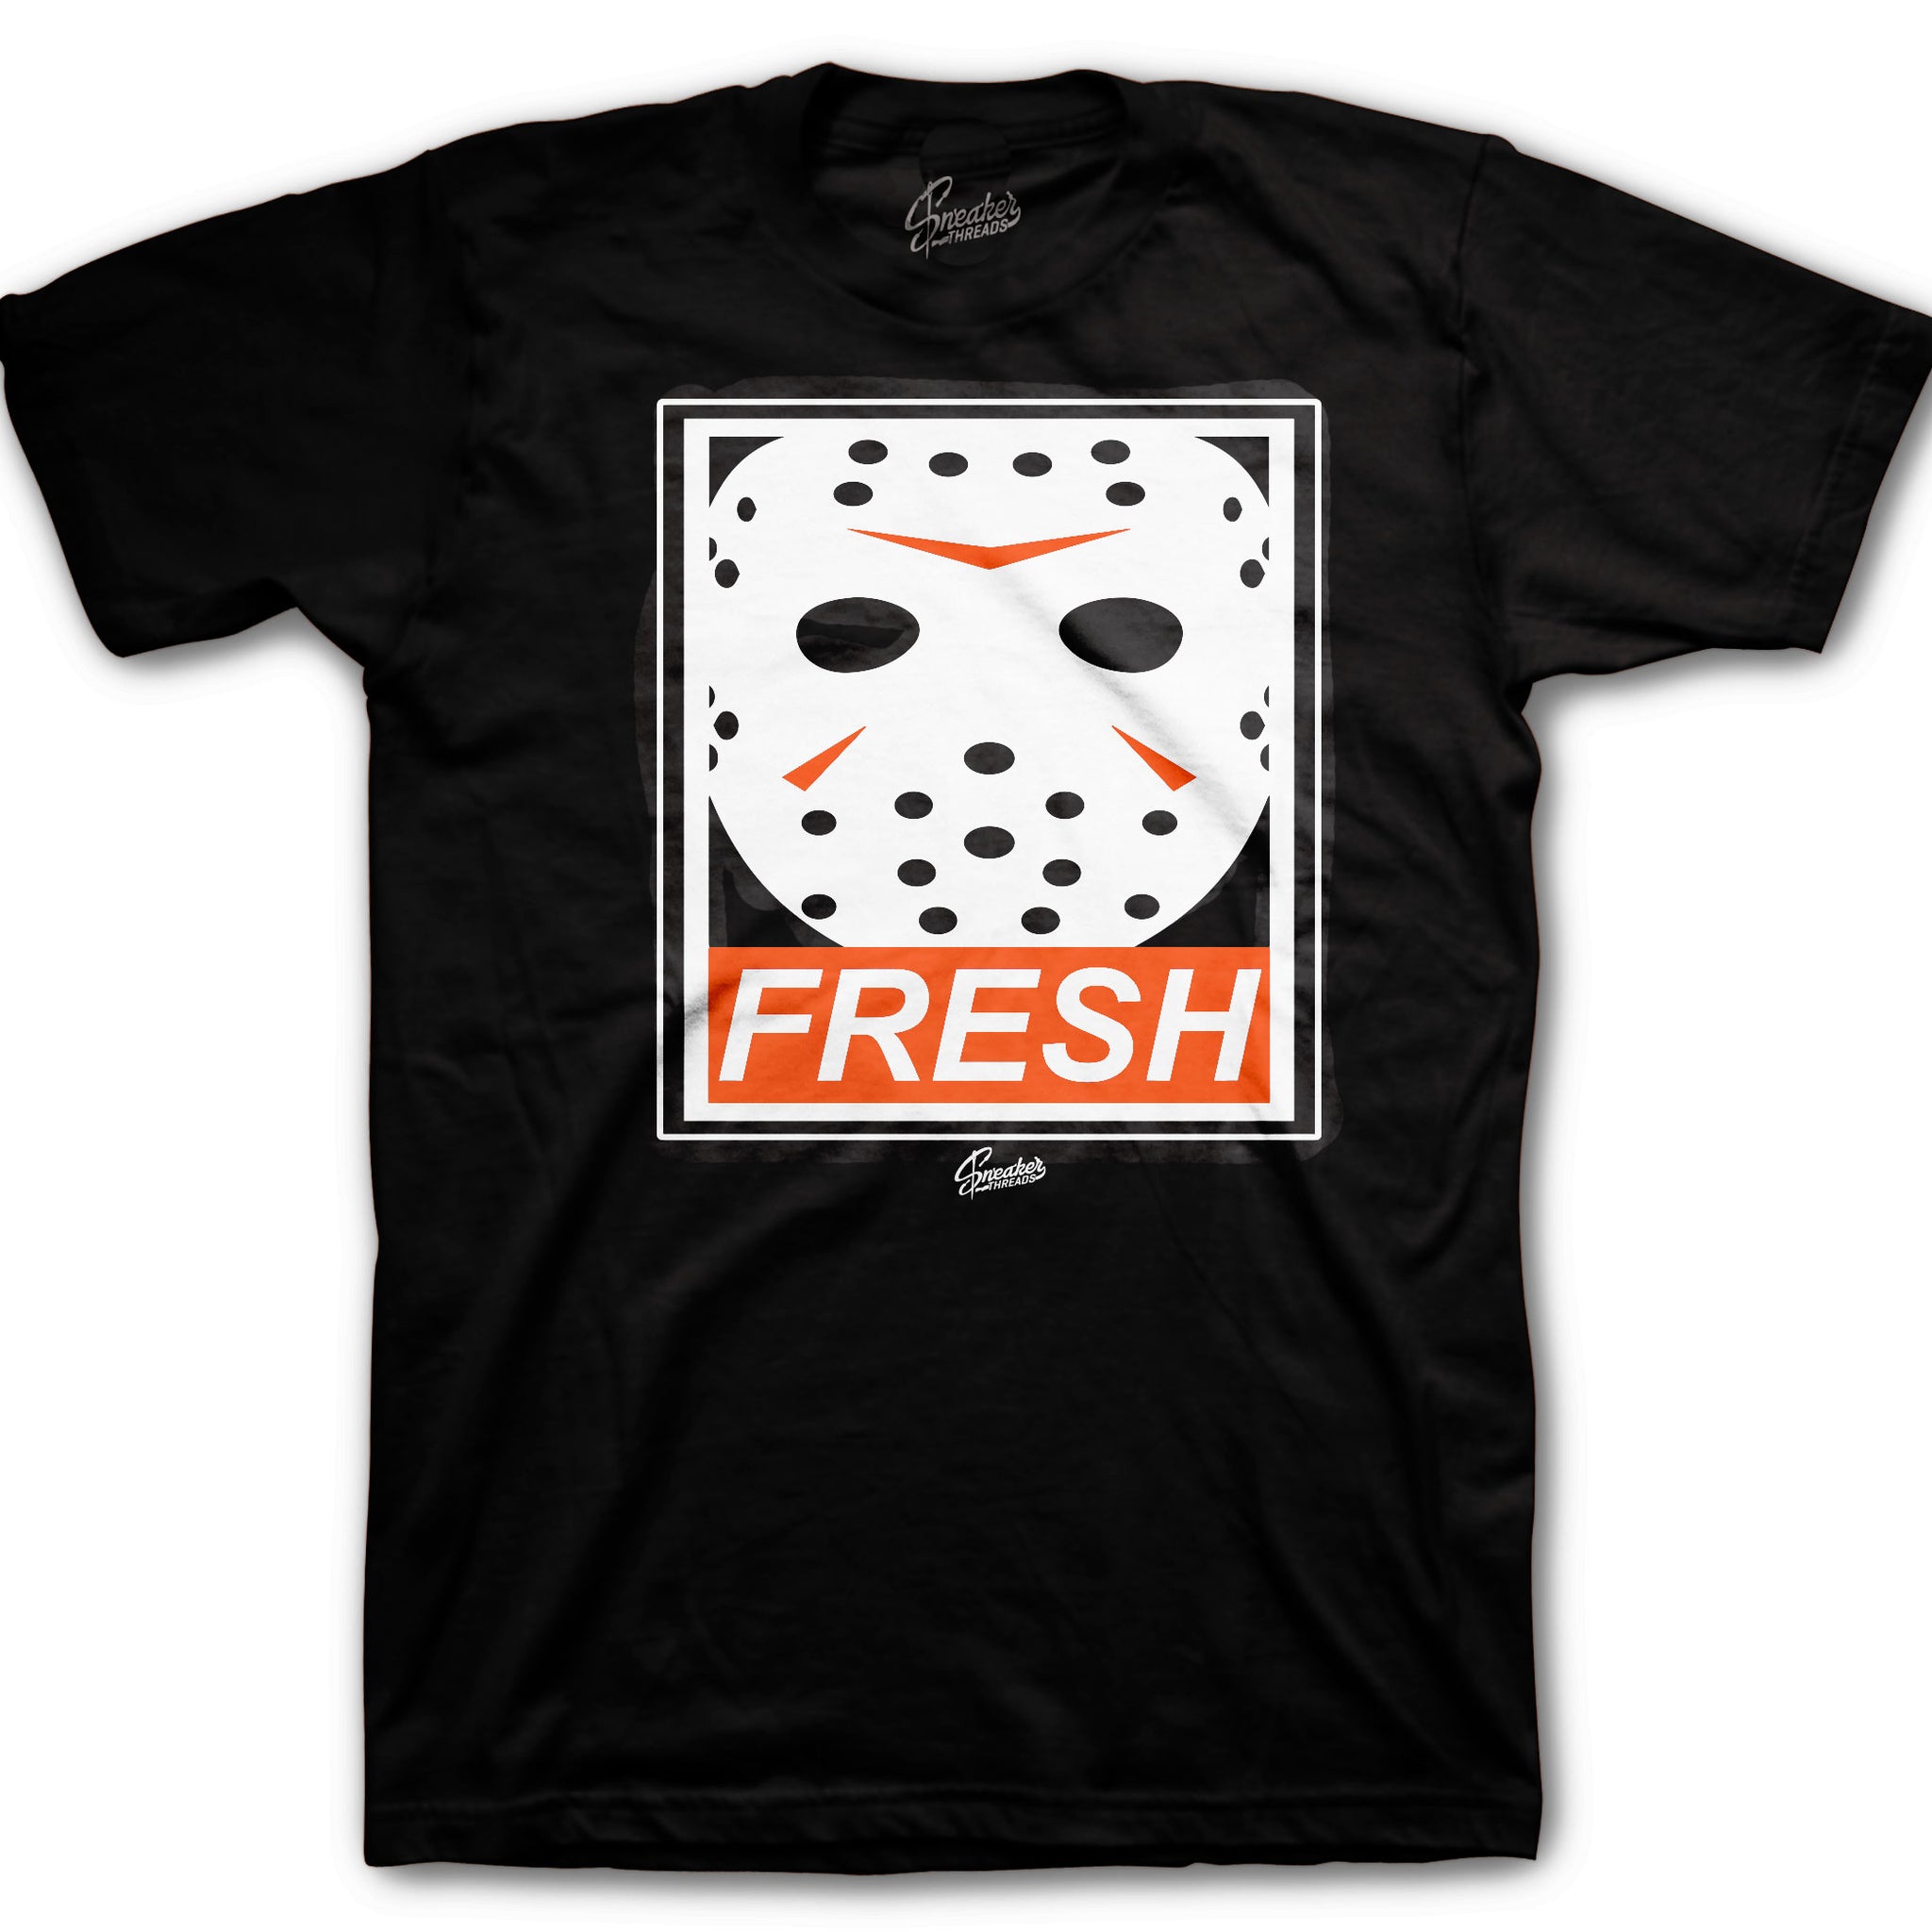 Spooky season shirts to match perfect with Shattered Backboards 1